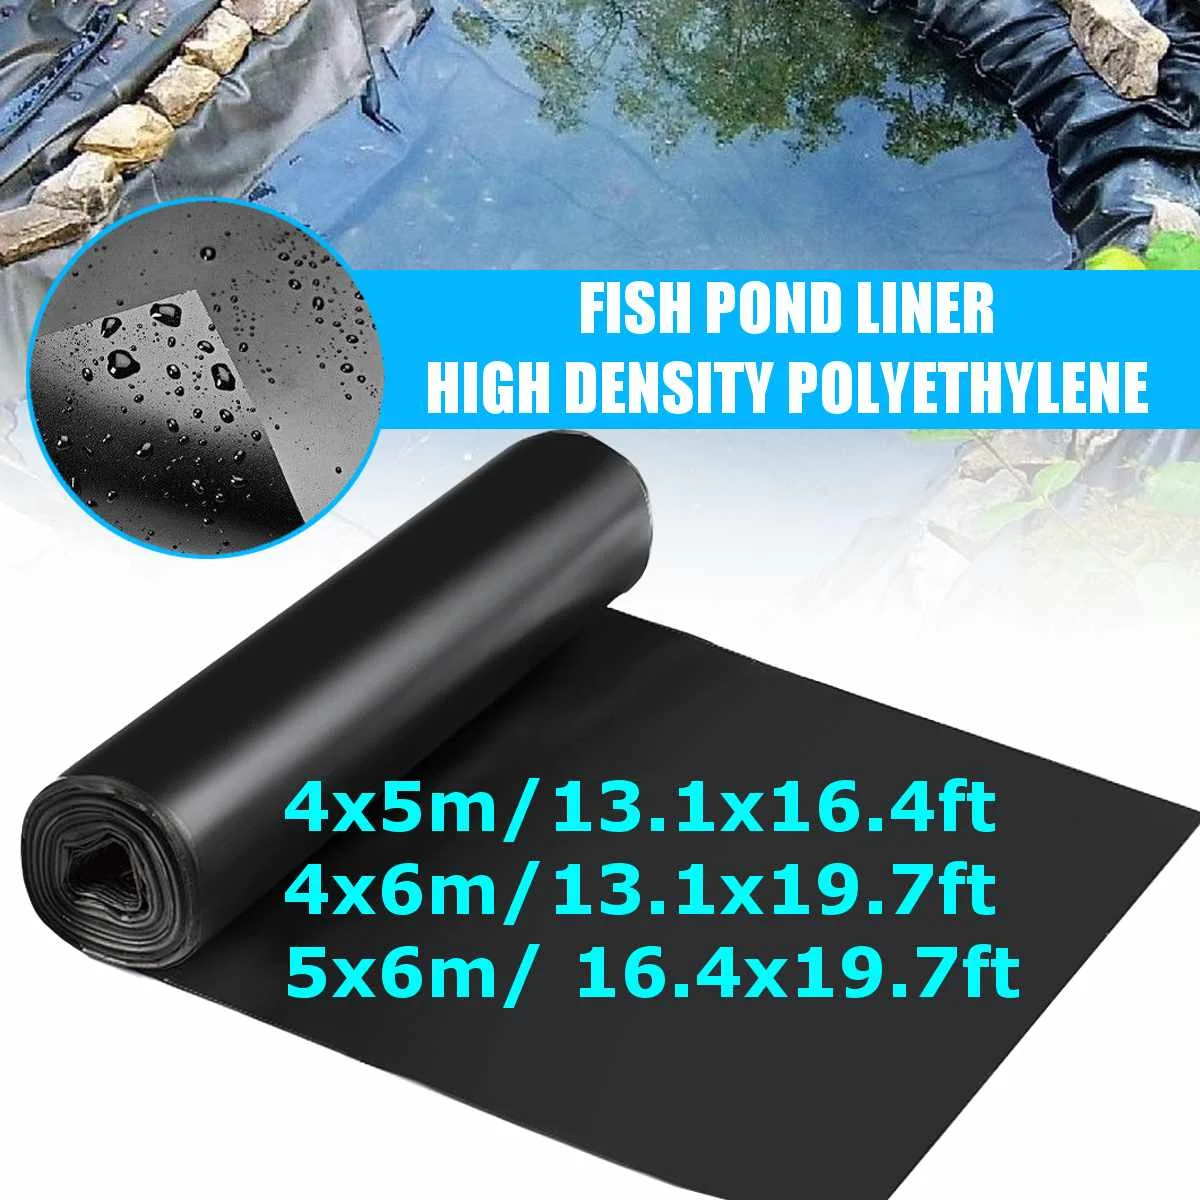 Pond Lining For Fish Ponds Liners And Ponds 2m 3m 4m 5m 6m 7m 8m 9m 10m High-density HDPE Cuttable Waterproof Membrane Easy To Bend Size:2x2m N/A Pond Cover 